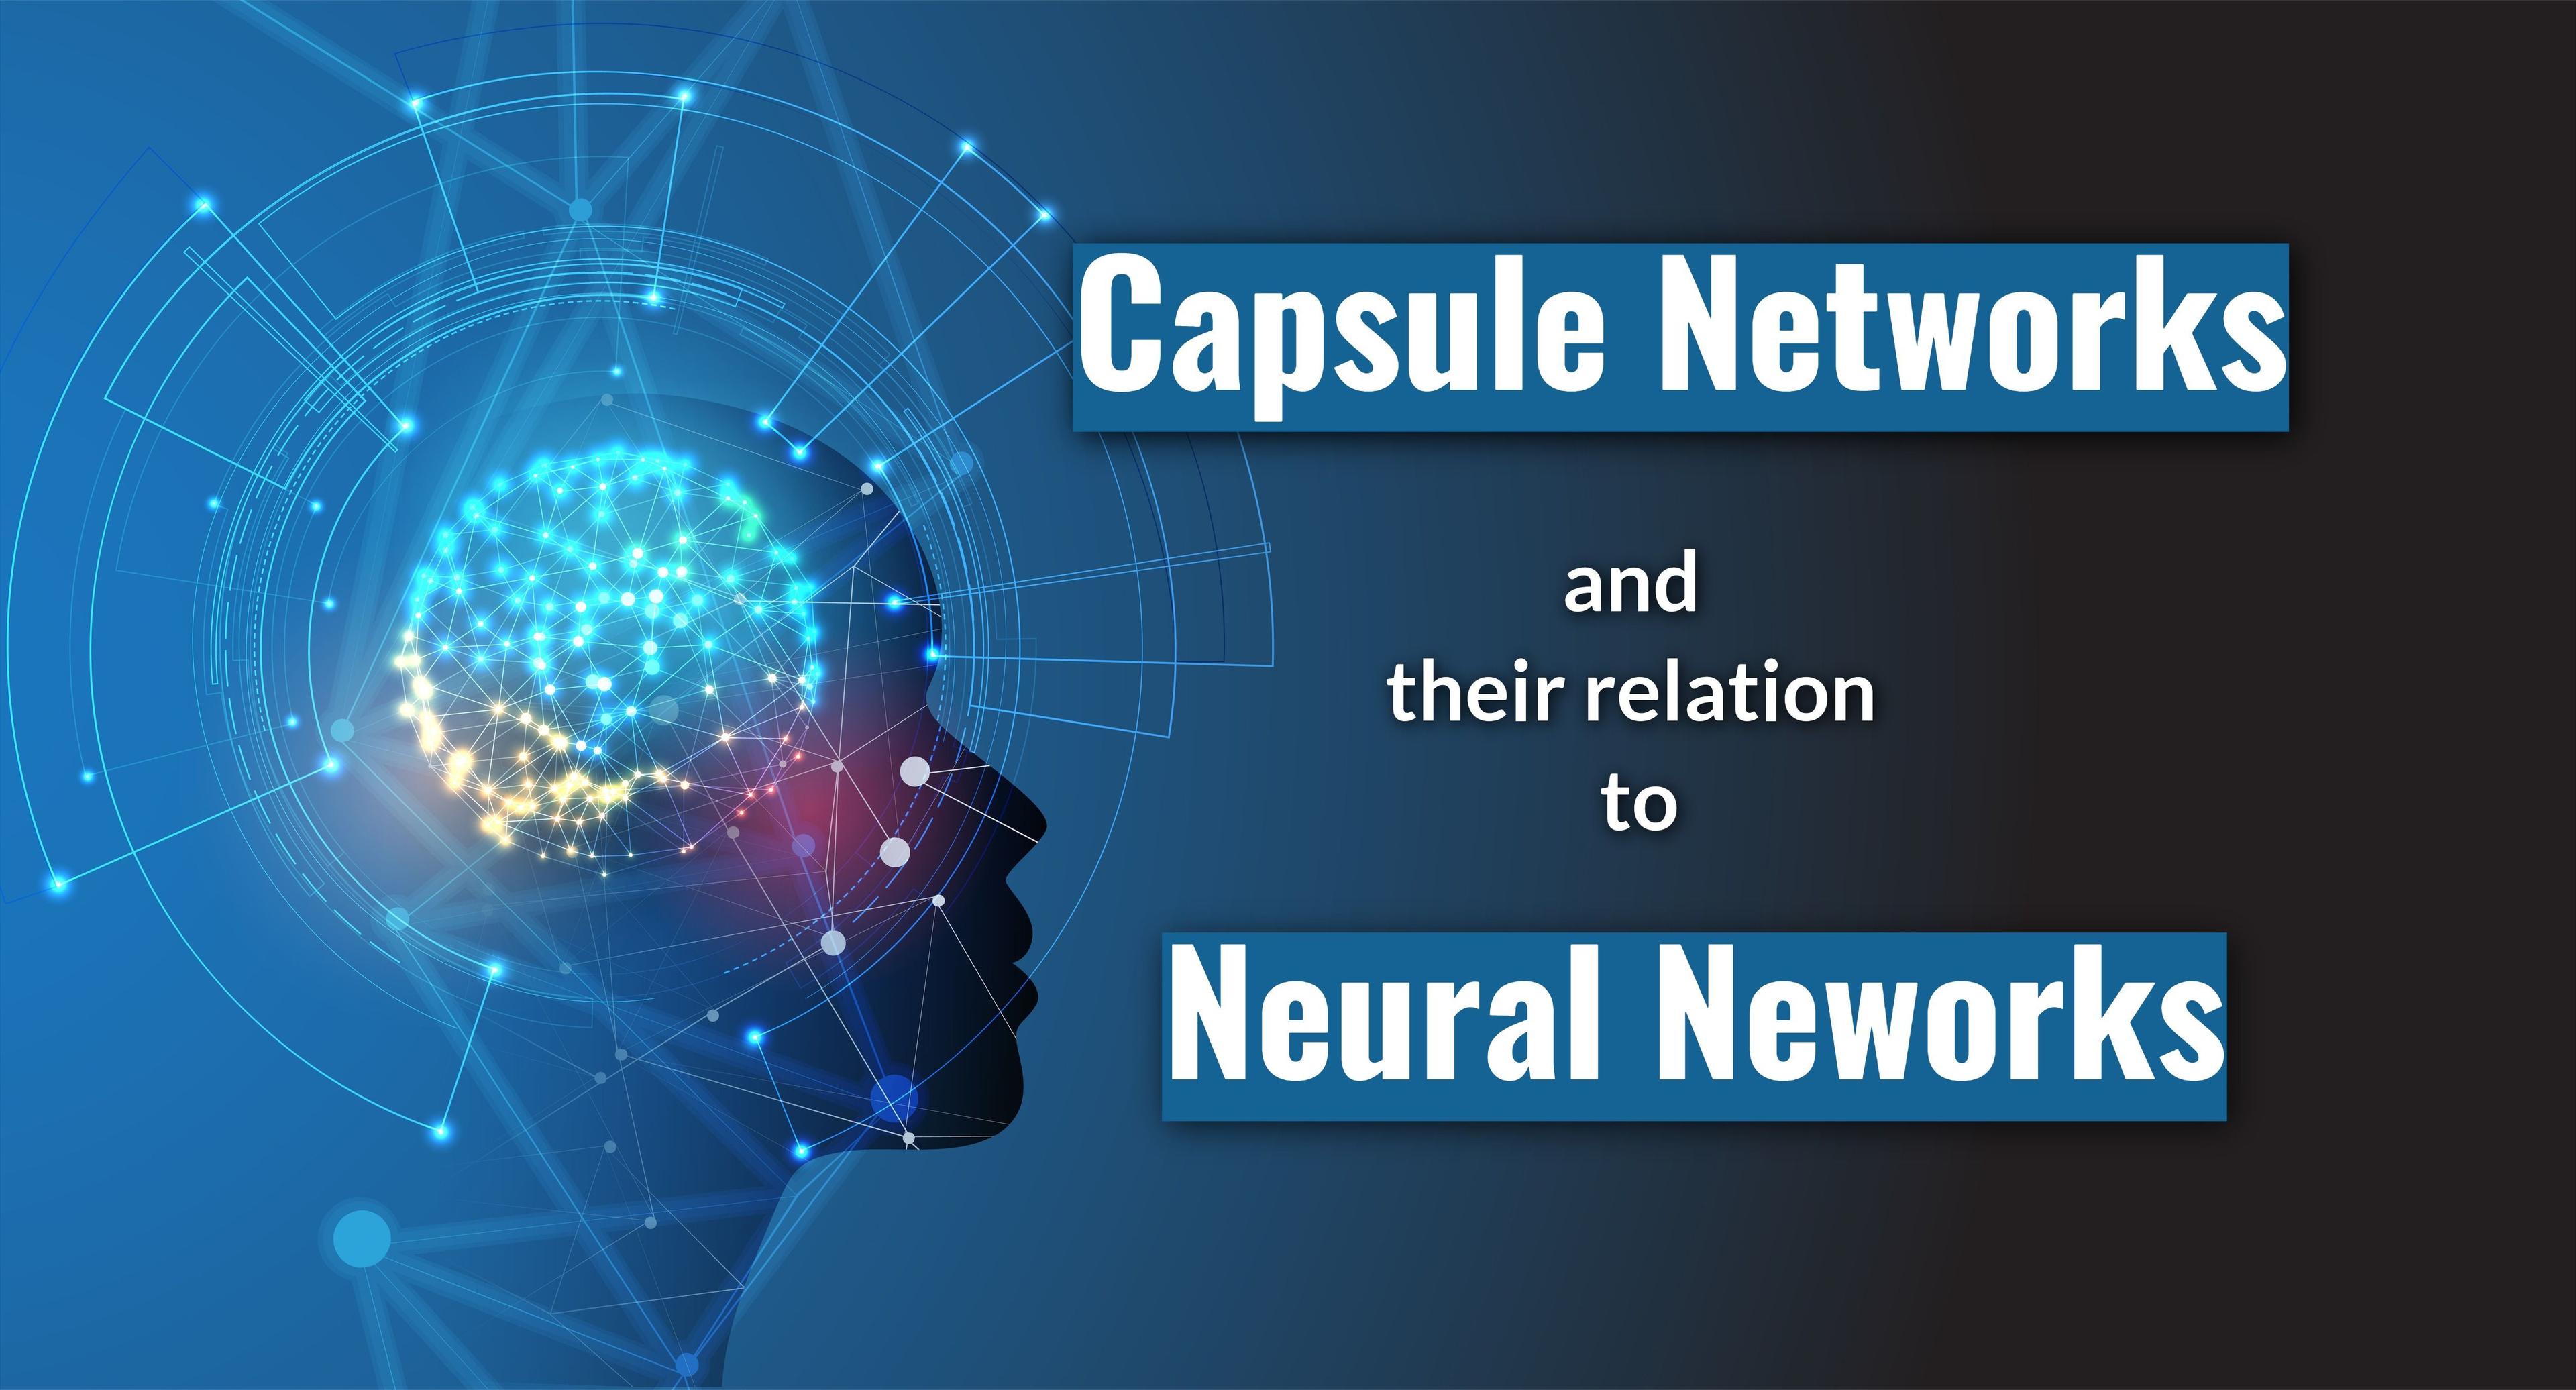 Capsule Networks and how are they related to Neural Networks.